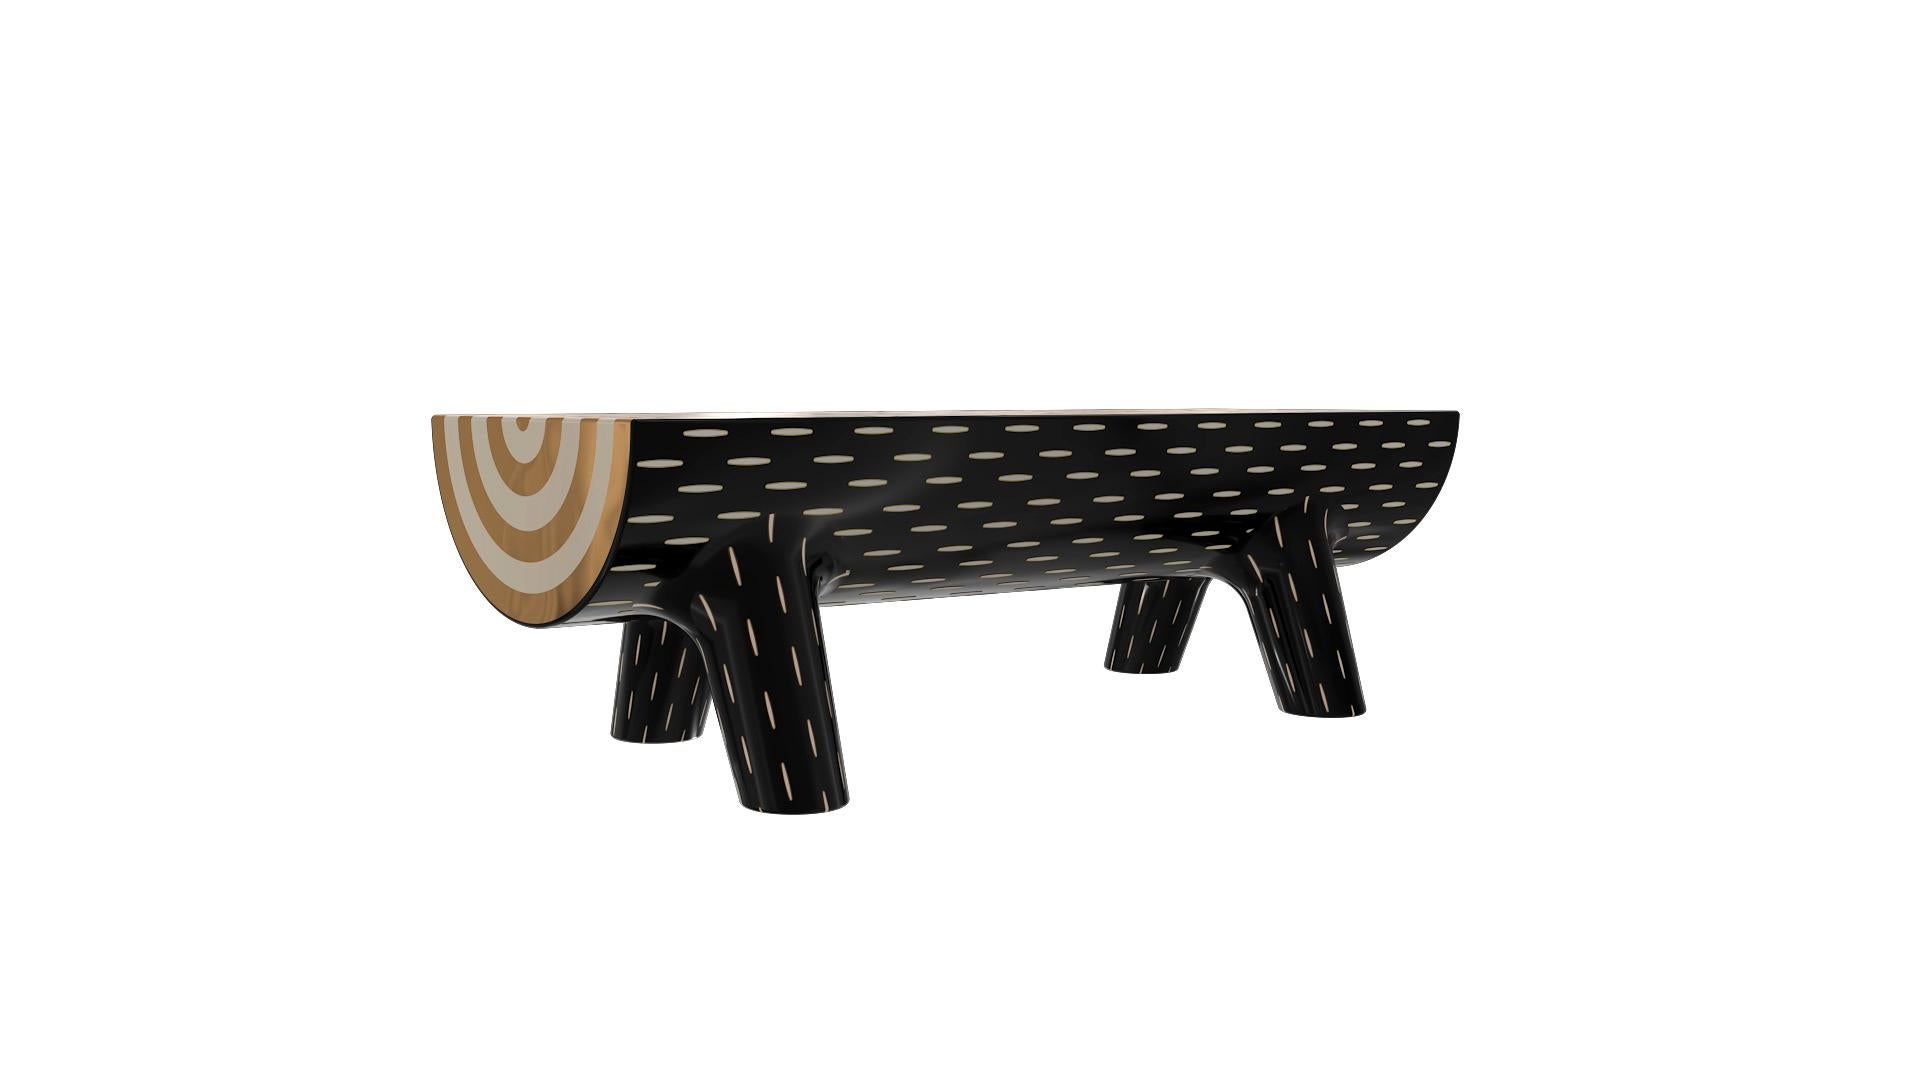 Forest bench with brass inlay by Marcantonio is a fun seat with a brass inlay top and 